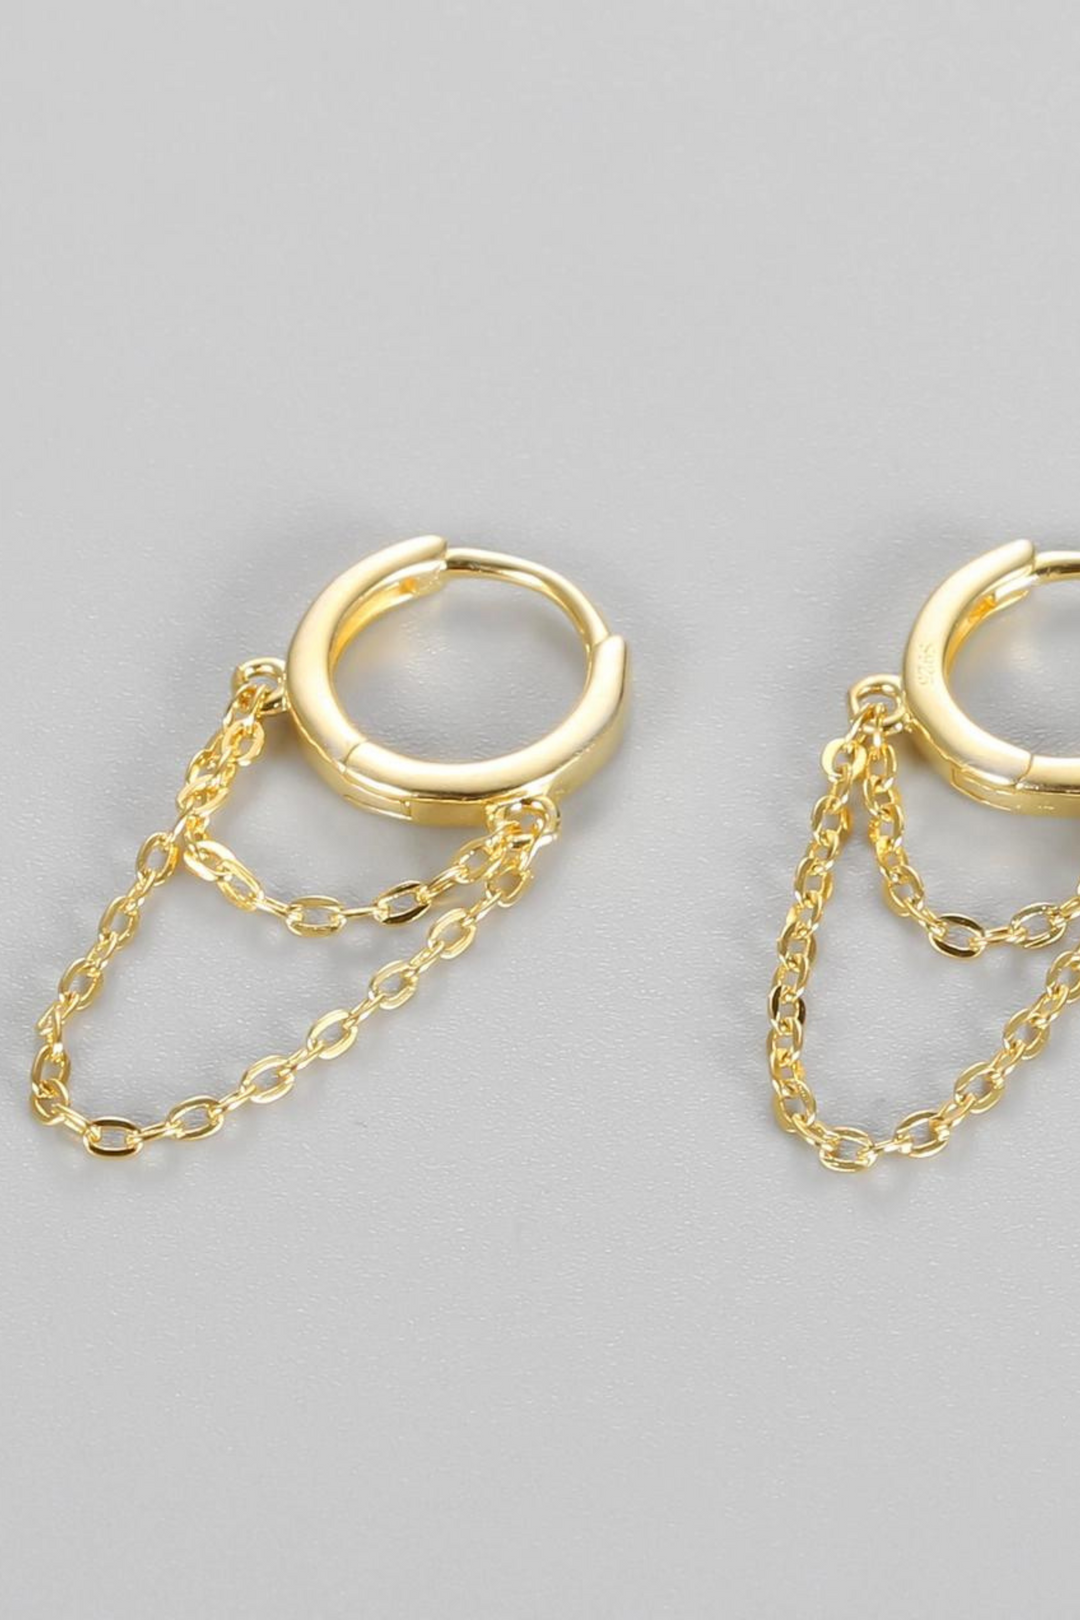 The Gold Plated Chain Hoops